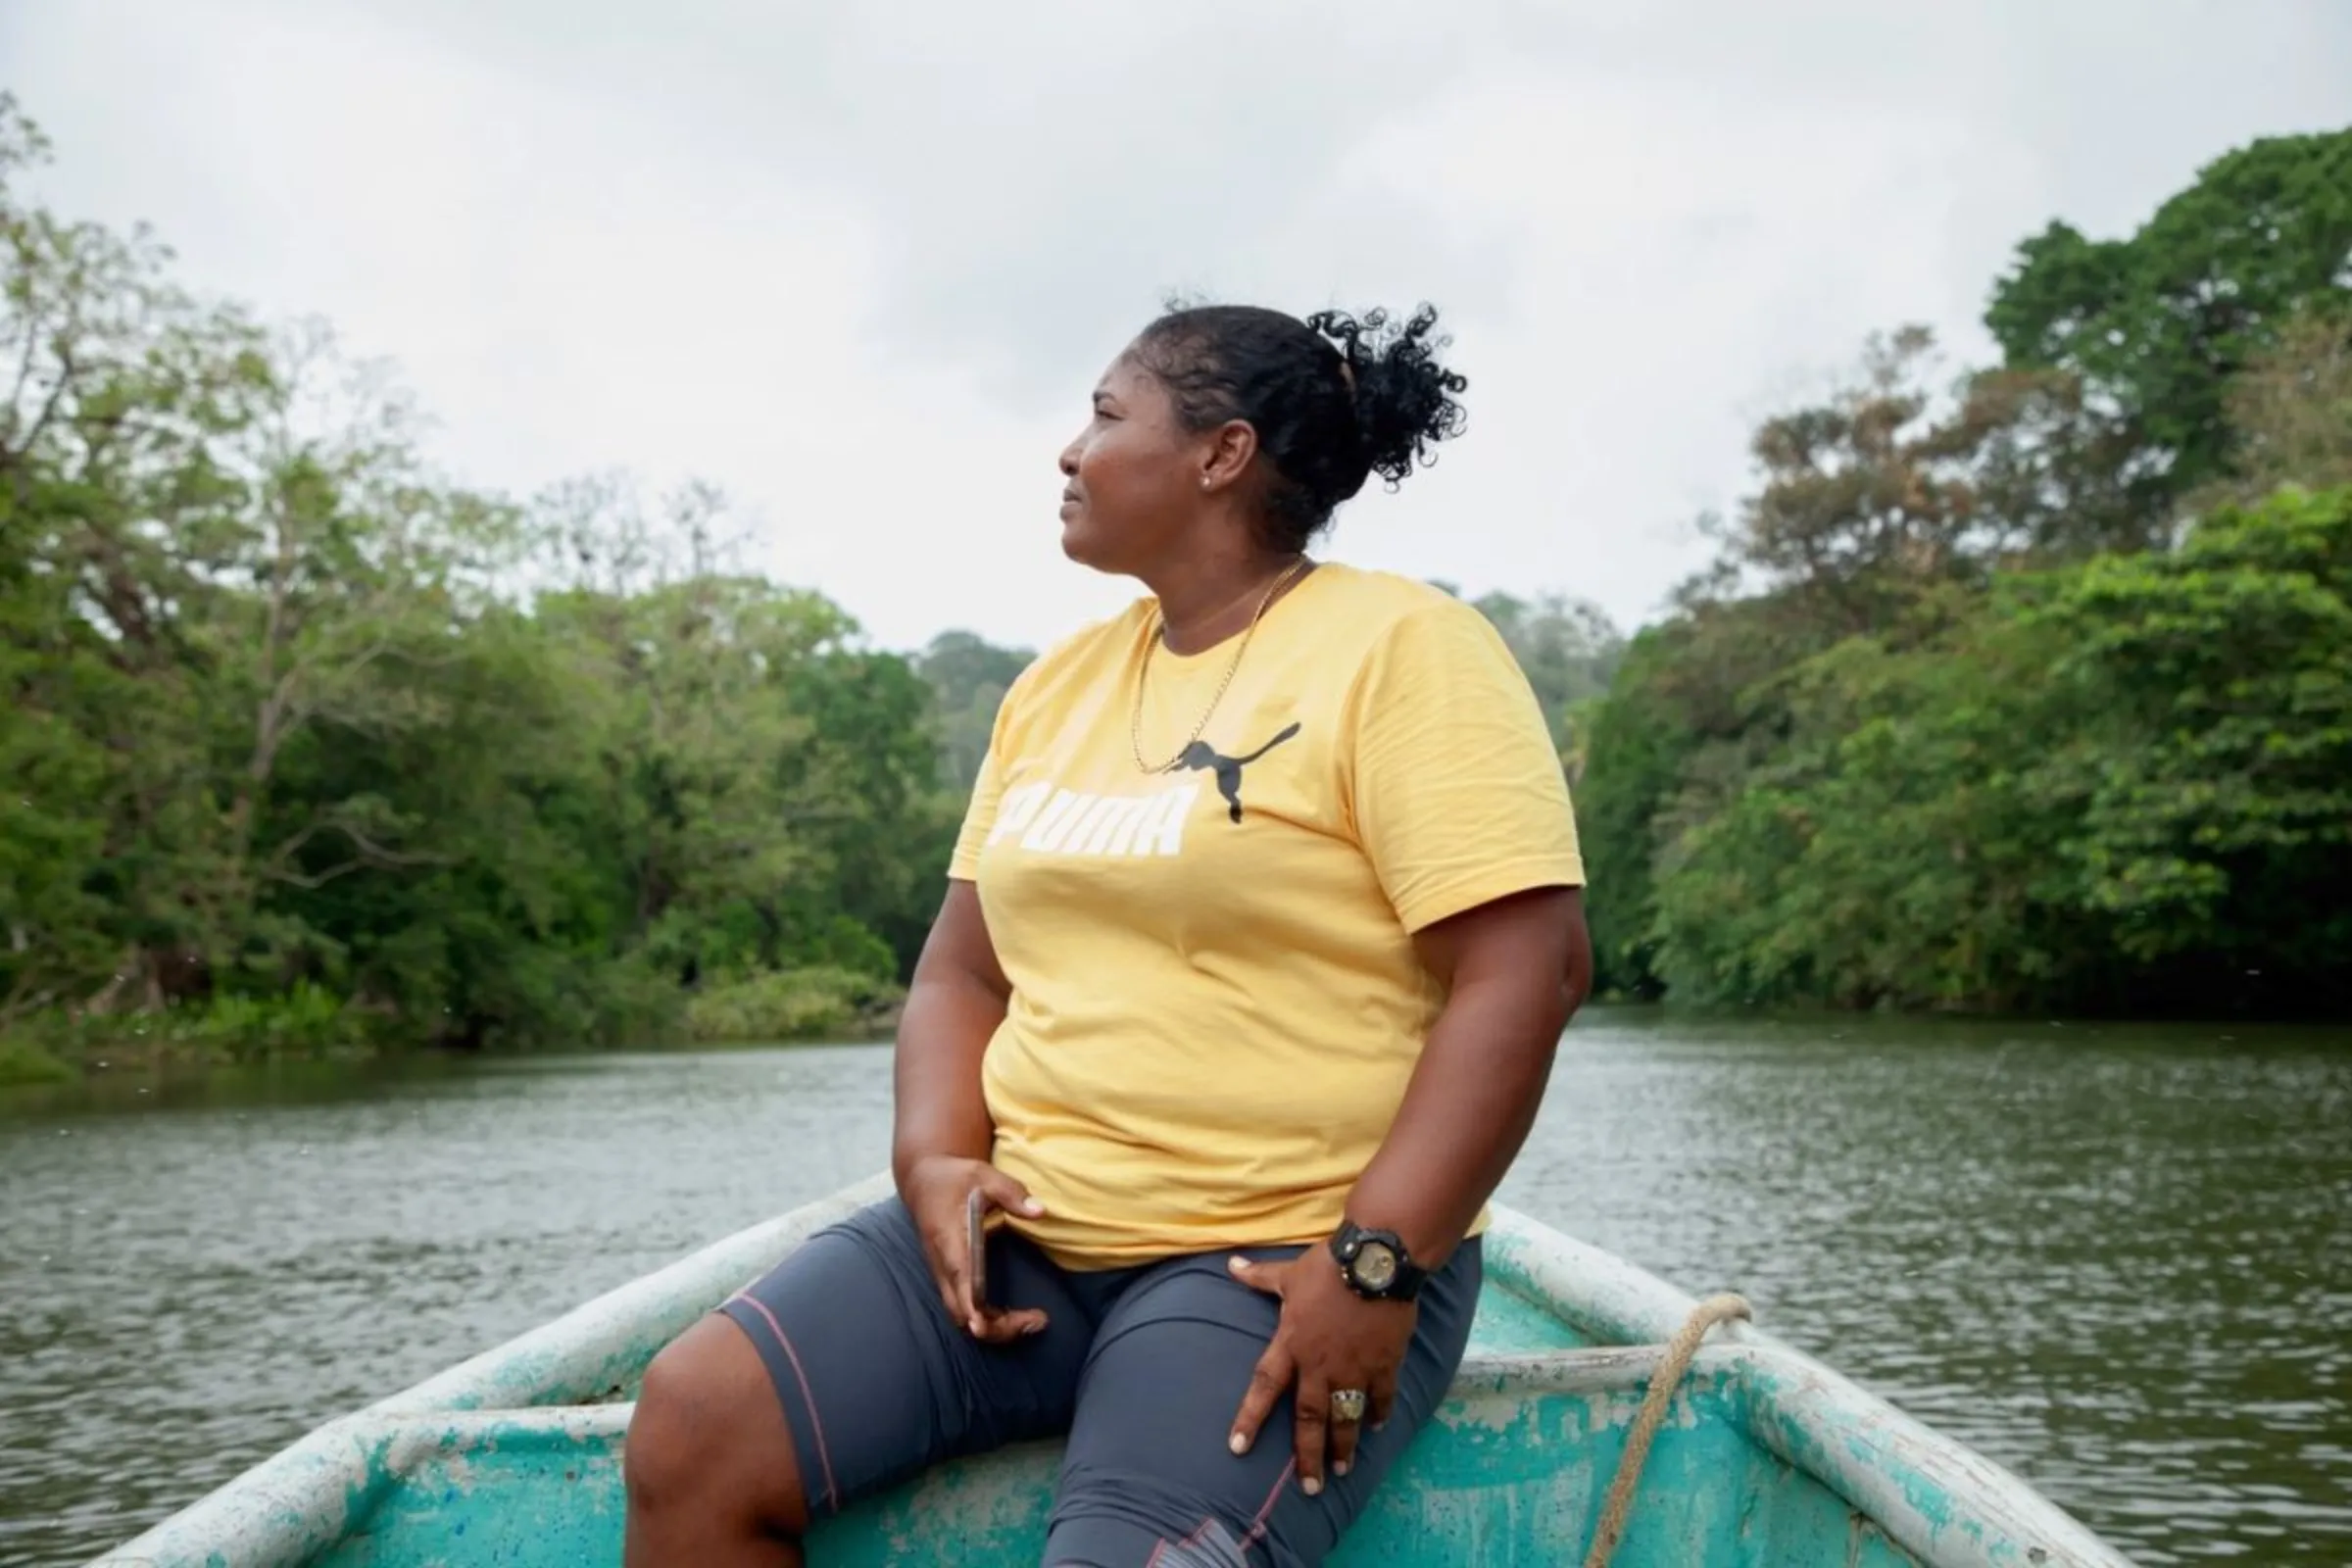 'We all need water': Panama's canal, and people, thirst for more